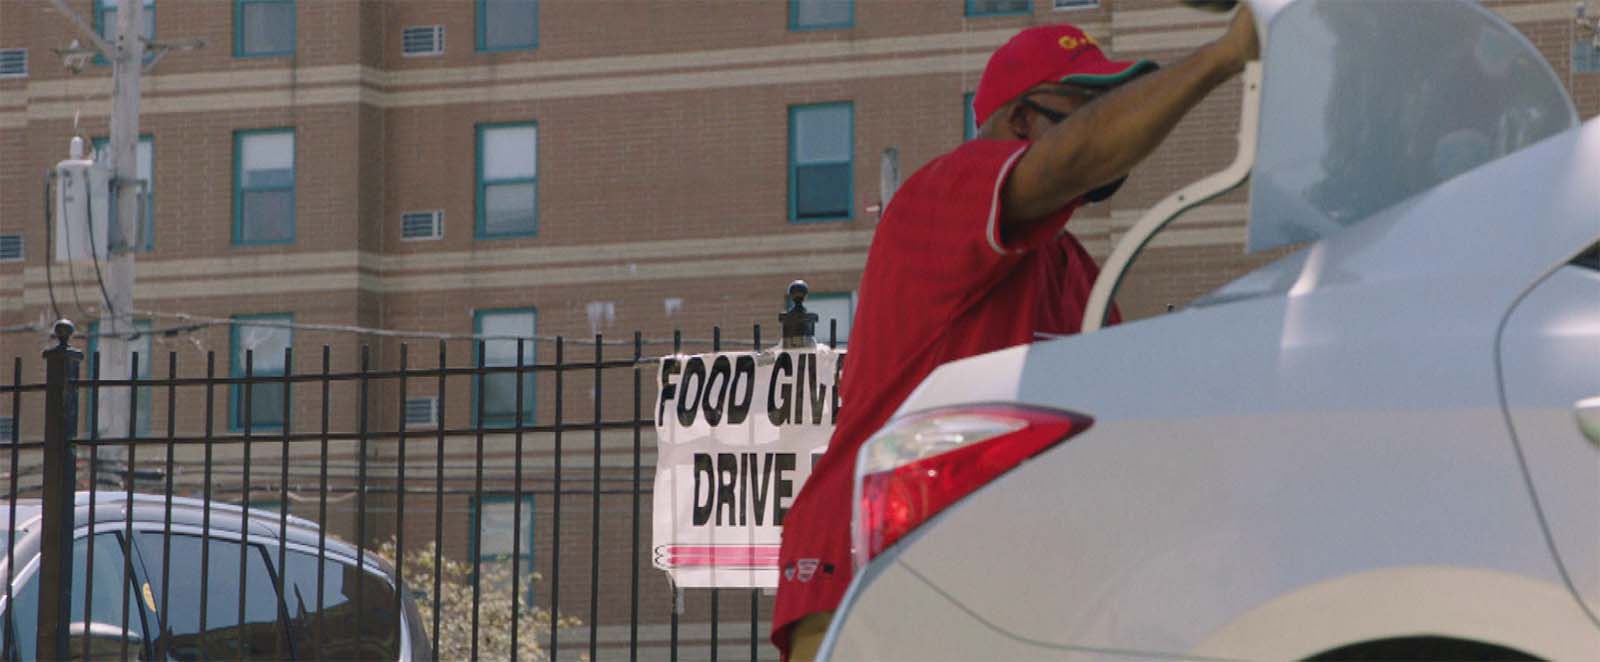 A man closes a car trunk in front of a food drive sign.